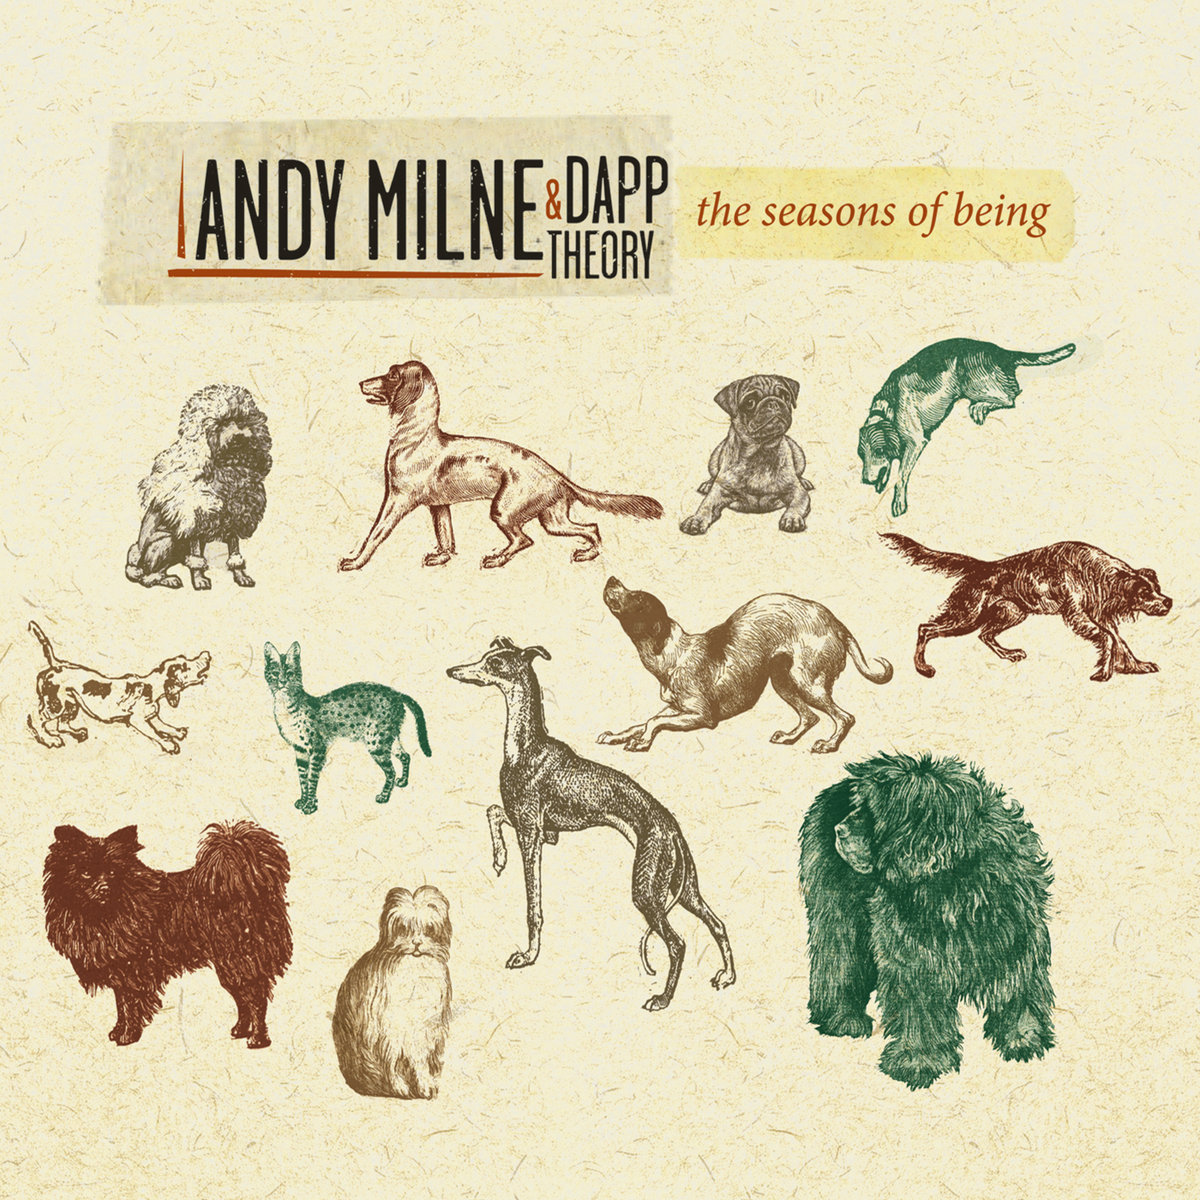 Andy Milne & Dapp Theory - The Seasons of Being (2018) [FLAC 24bit/96kHz]